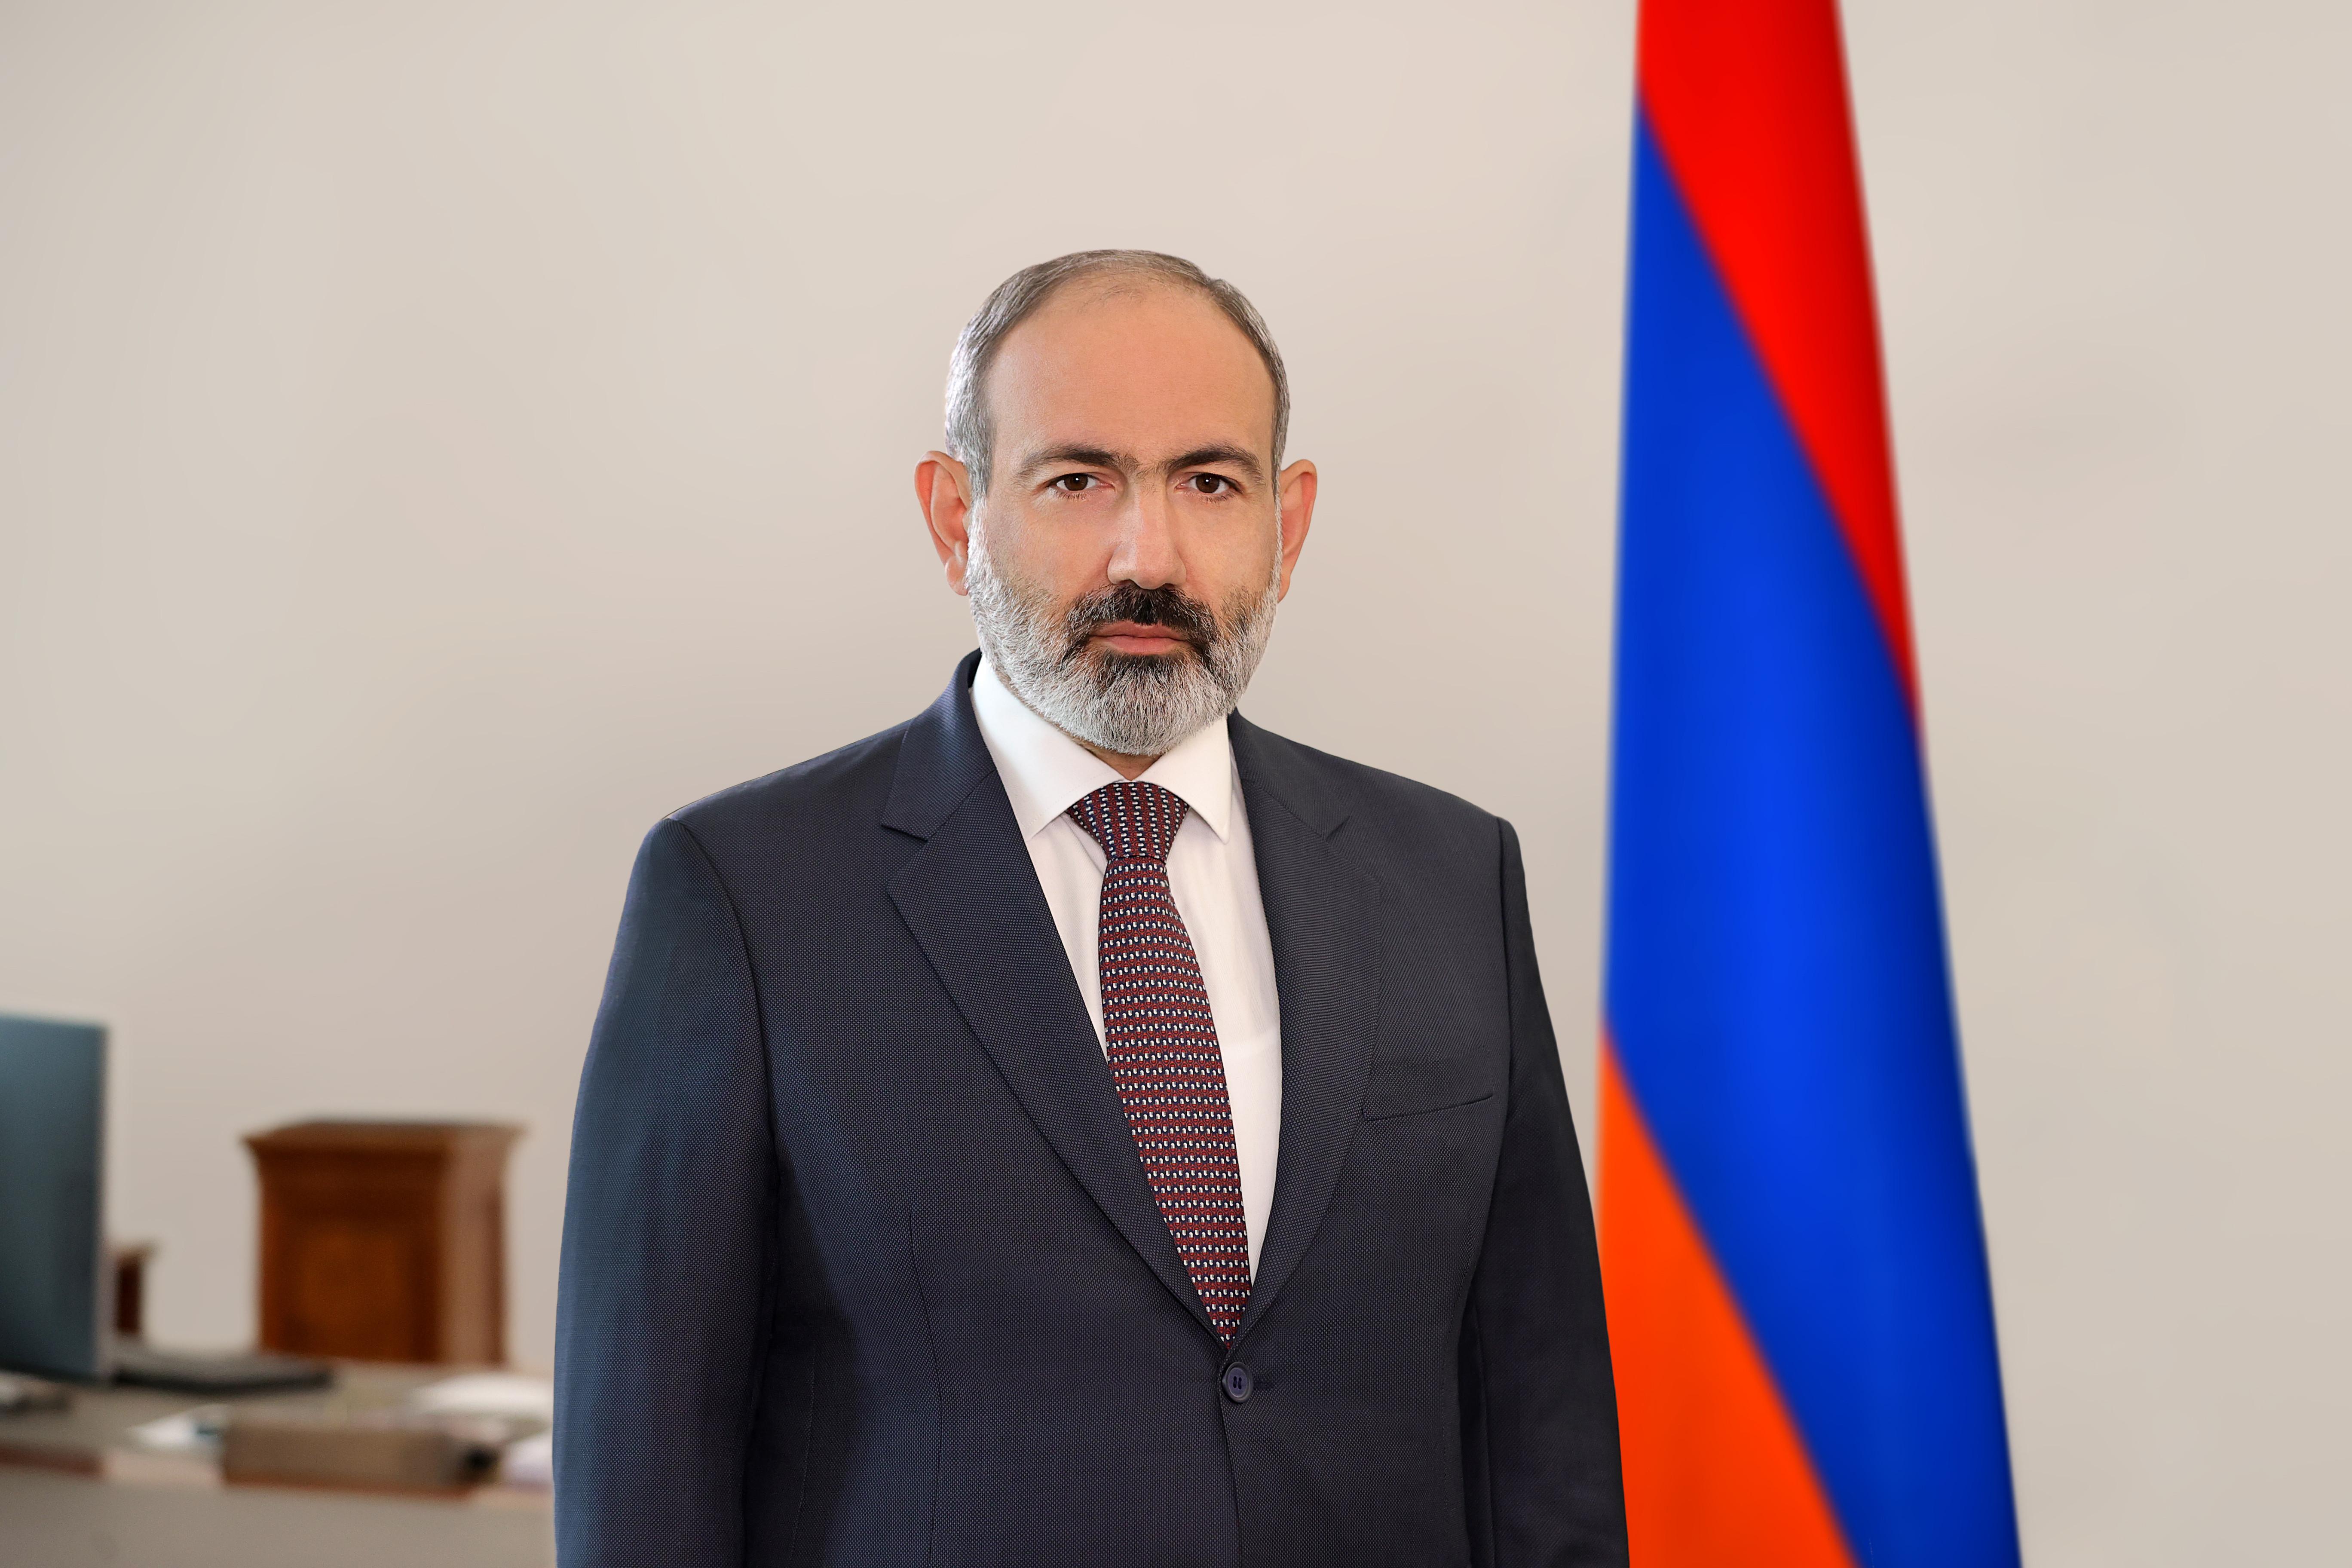 Pashinyan Marks &quot;Karabakh Movement&quot; Anniversary; Talks of Peace, Security, Not Self-Determination